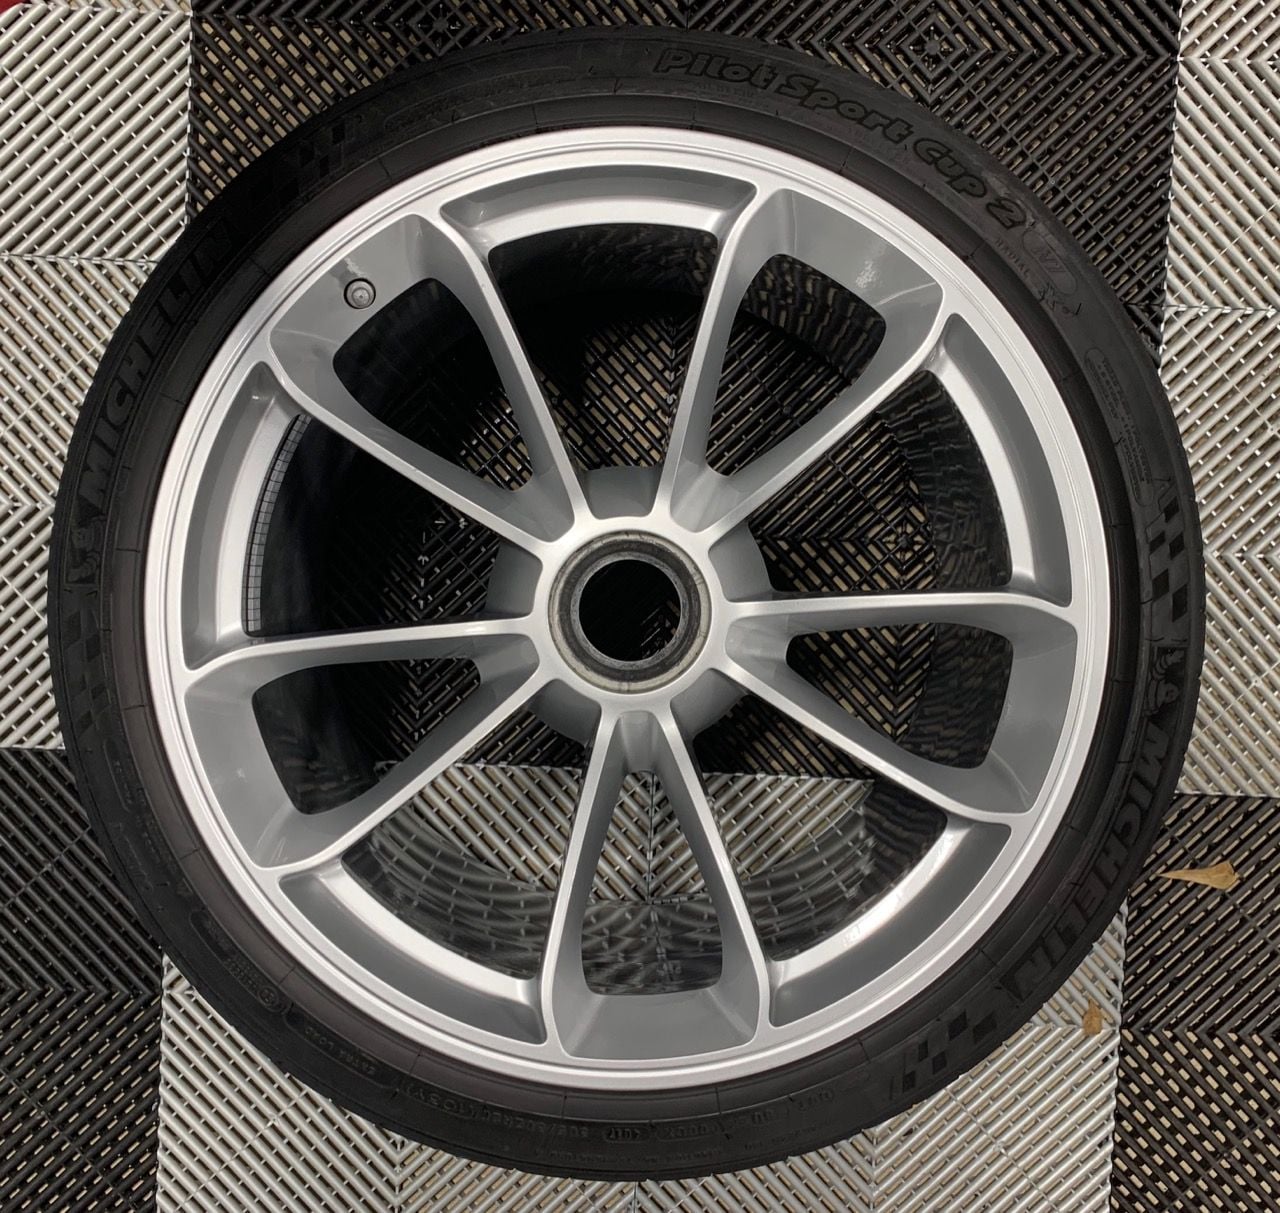 Wheels and Tires/Axles - Porsche GT3 991.2 OEM wheels and Cup2 tires - Used - 2014 to 2019 Porsche GT3 - Atlanta, GA 30309, United States